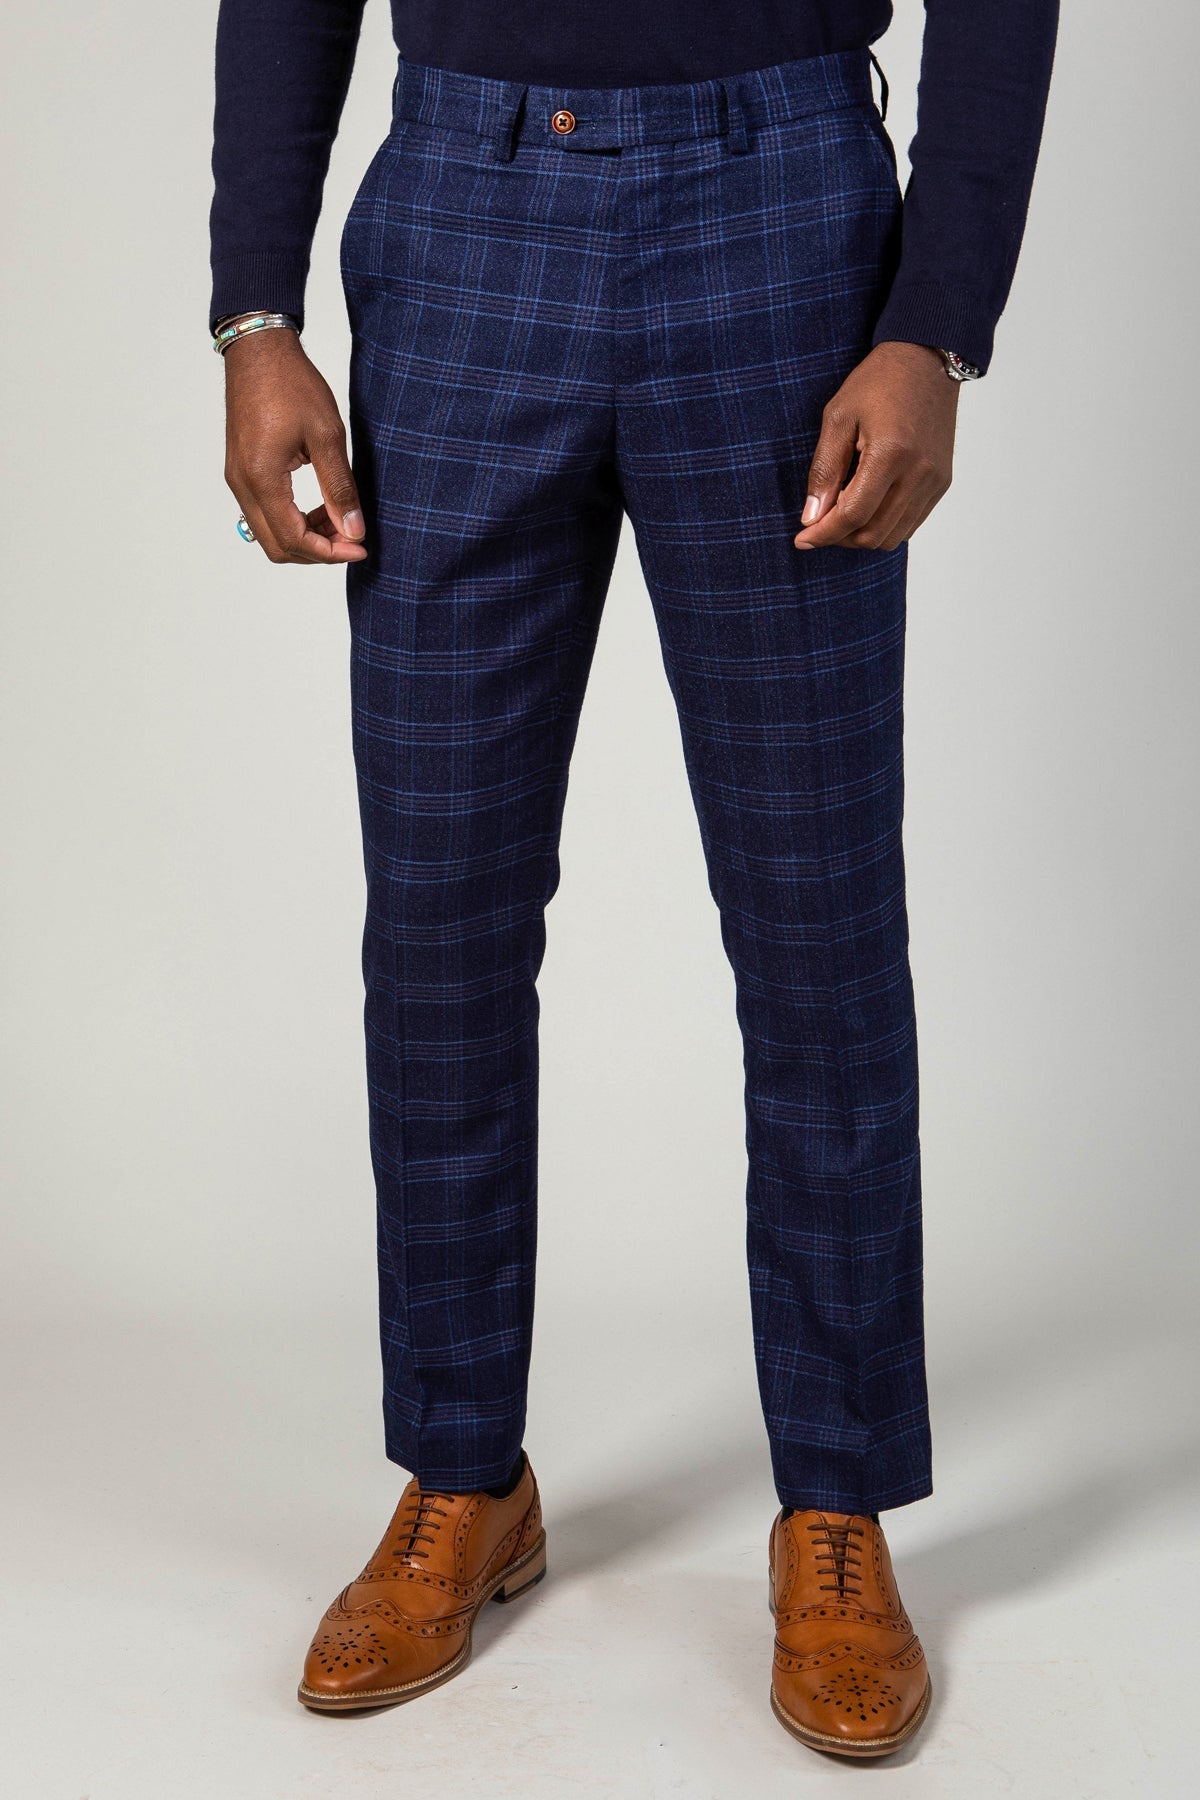 Man wearing men's CHIGWELL - Blue Tweed Check Trousers - Marc Darcy Menswear